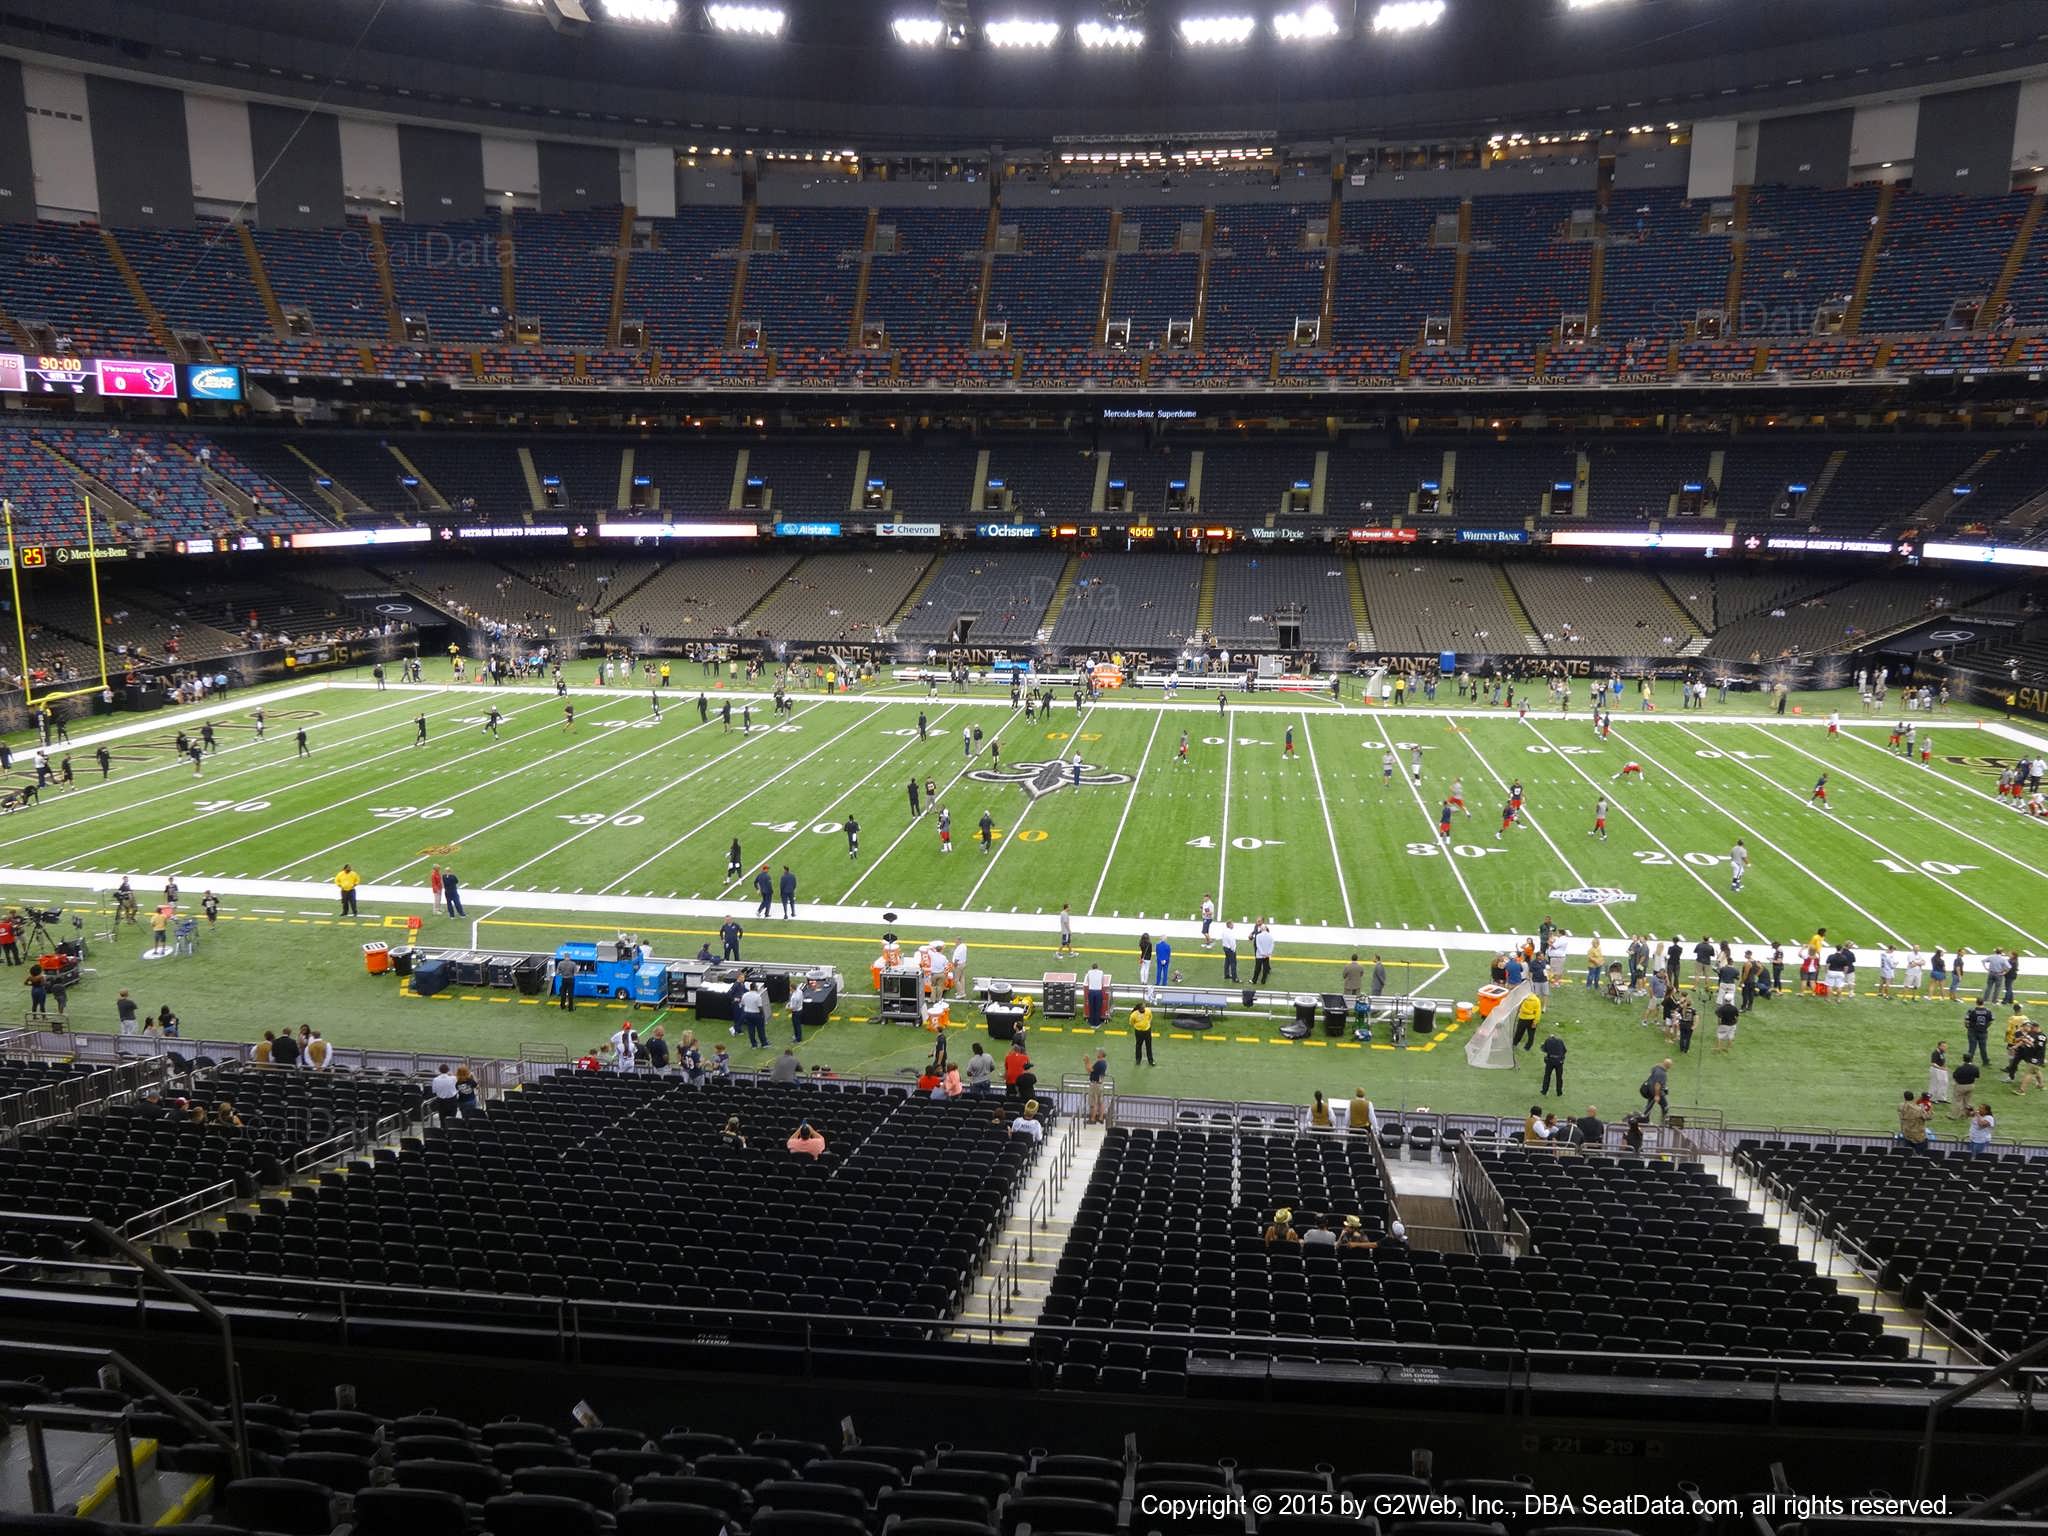 Seat view from section 311 at the Mercedes-Benz Superdome, home of the New Orleans Saints